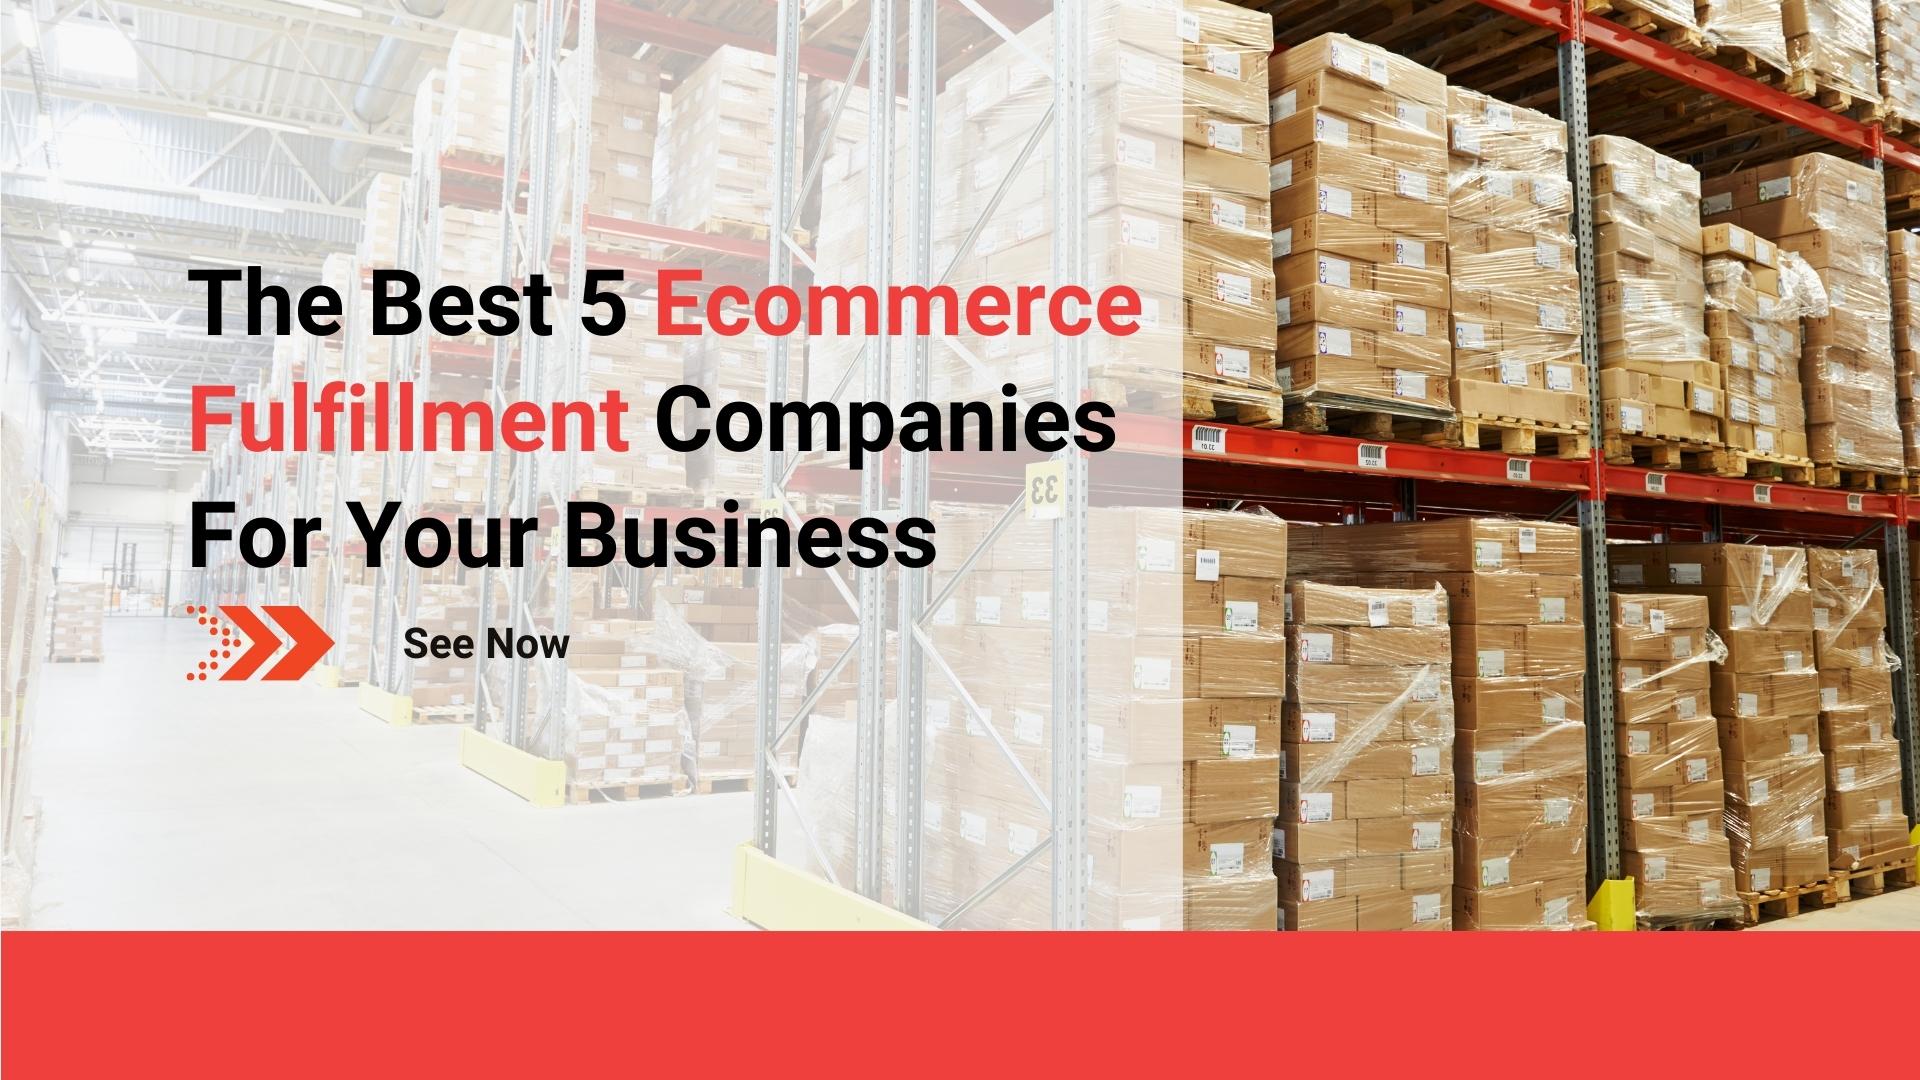 The Best 5 Ecommerce Fulfillment Companies For Your Business